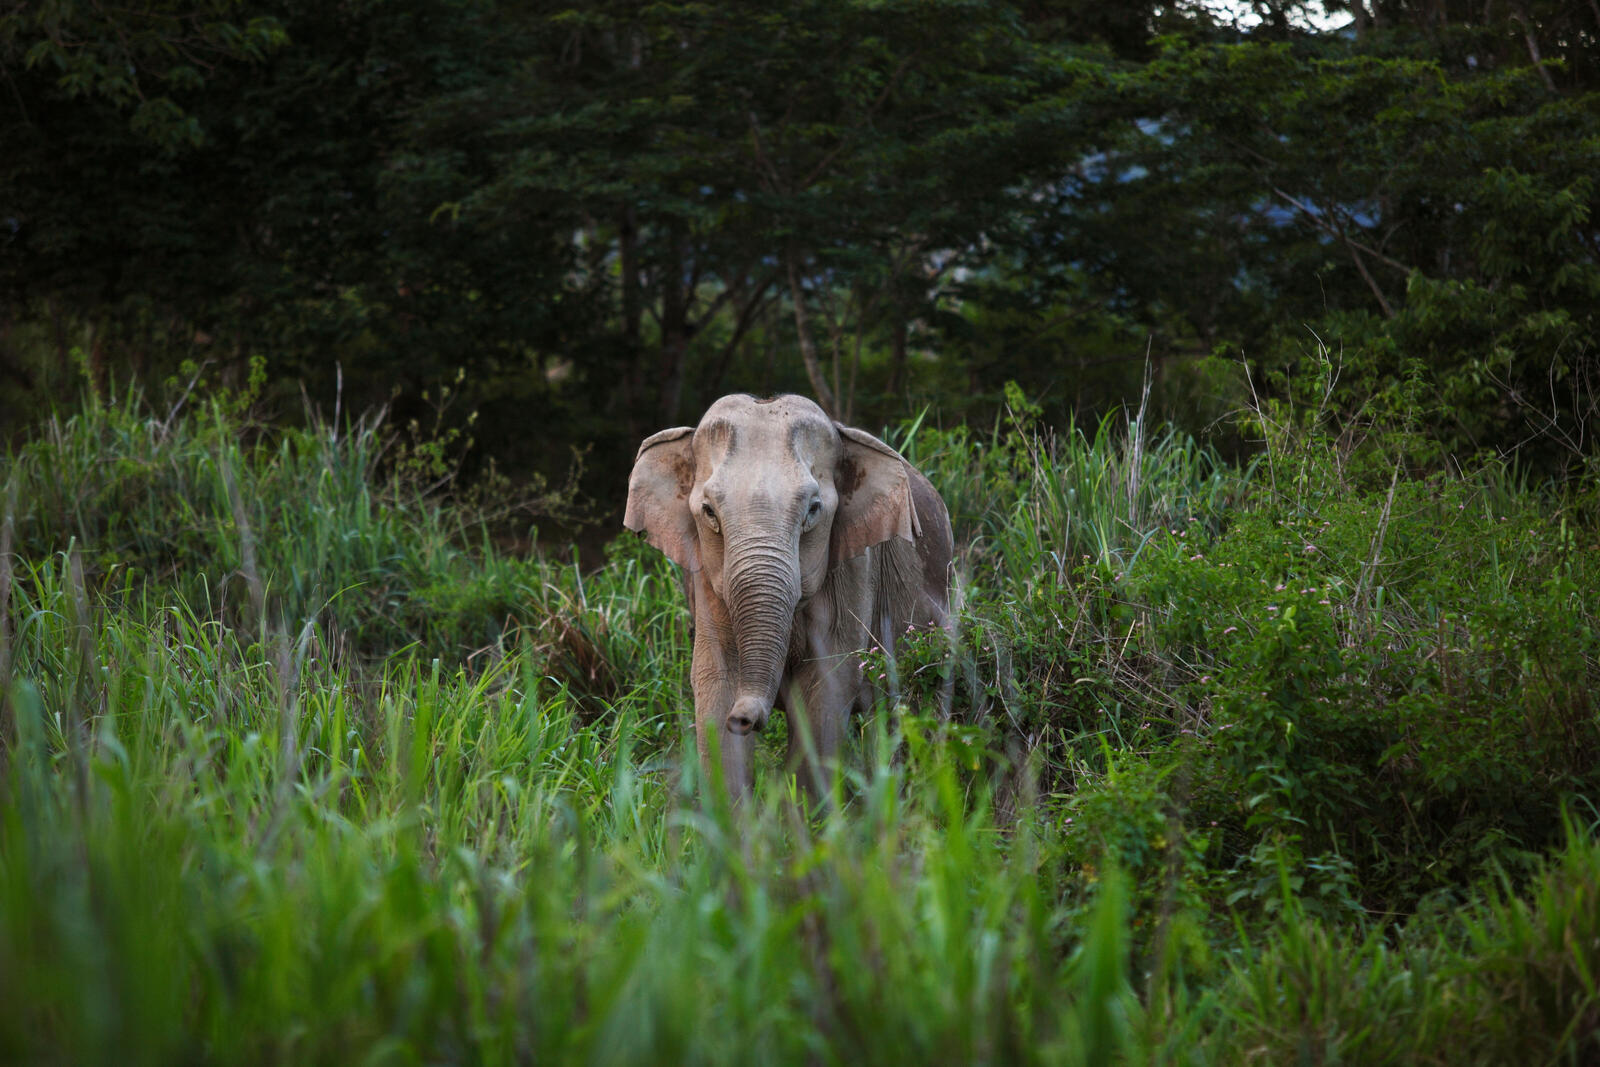 A lone elephant looks at the camera from tall grass in front of forest